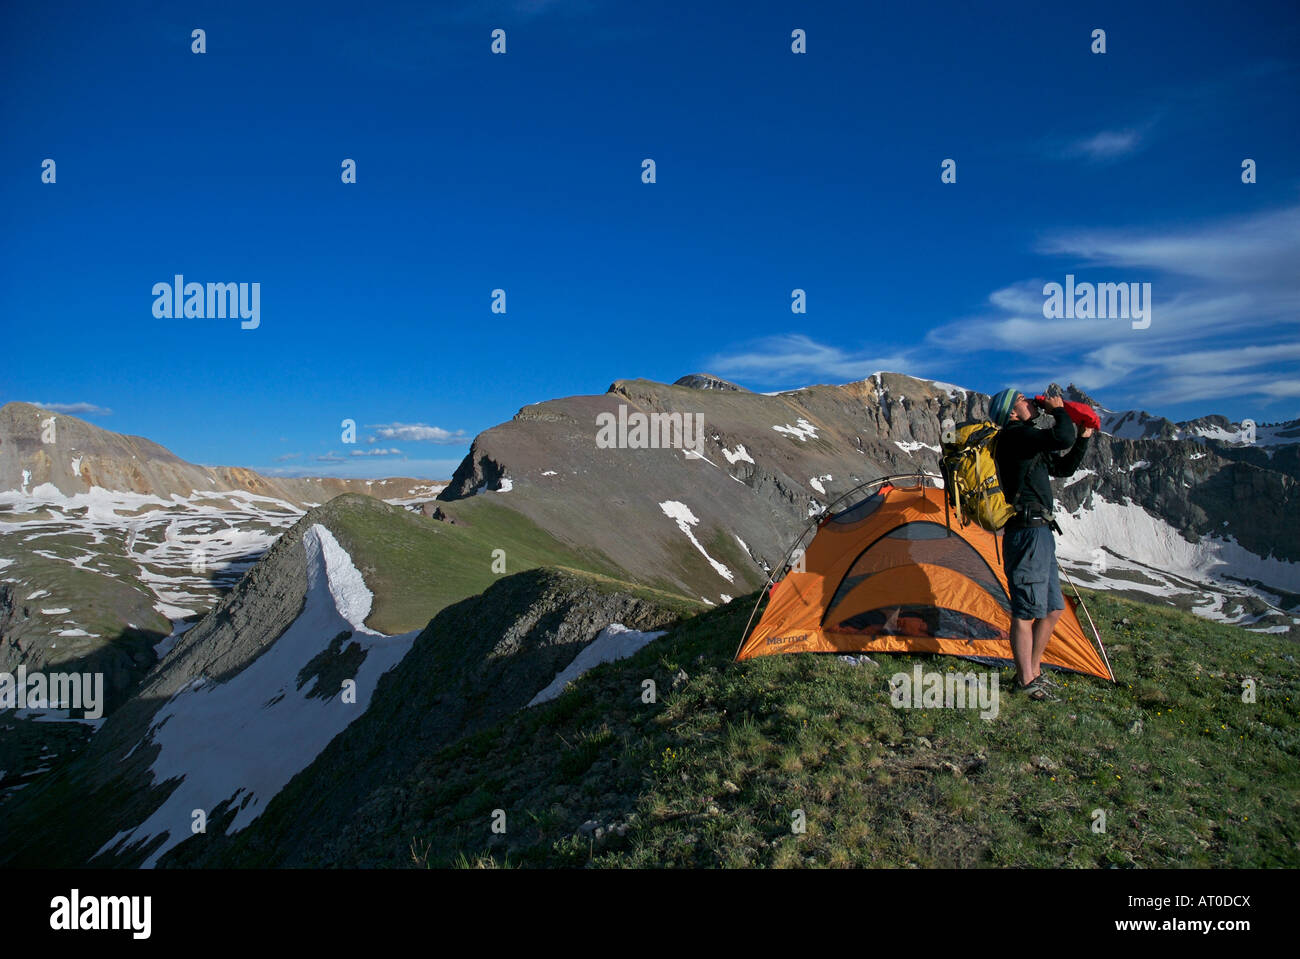 A man take a drink of water before departing his camp high up on a ridge in the San Juan mountains near Telluride Colorado Stock Photo